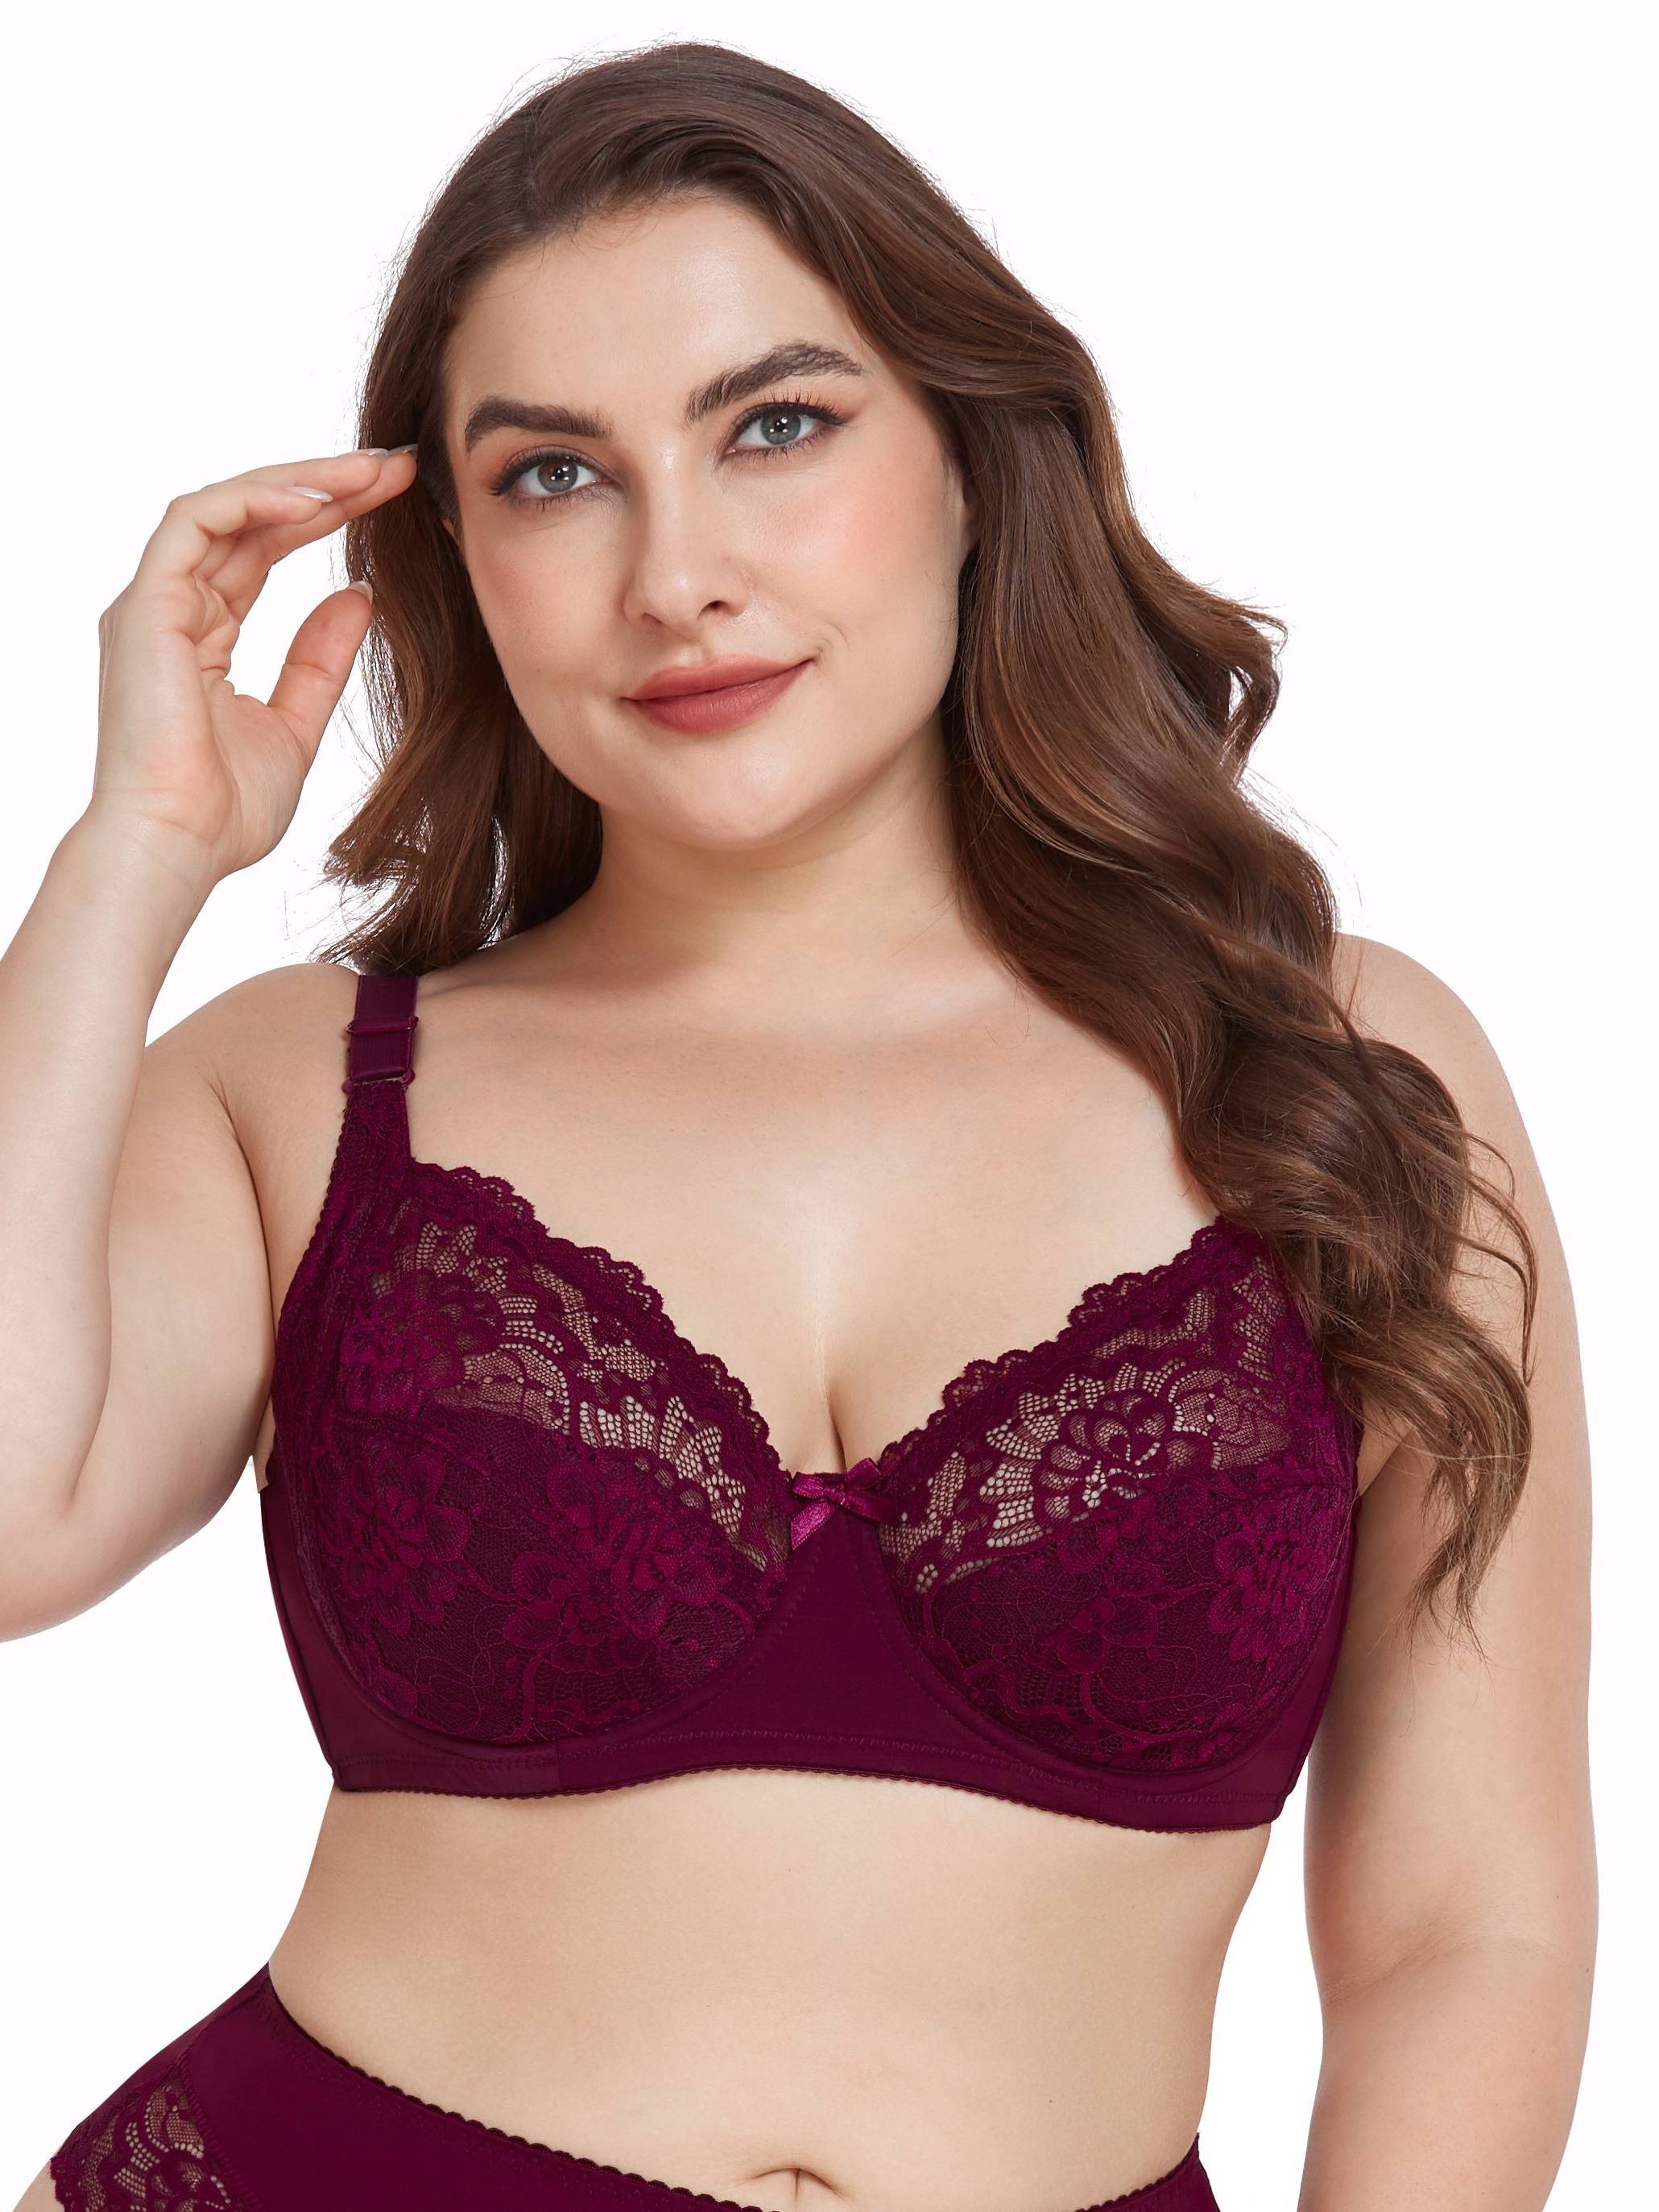  Womens Plus Size Floral Lace Underwired Bra Full